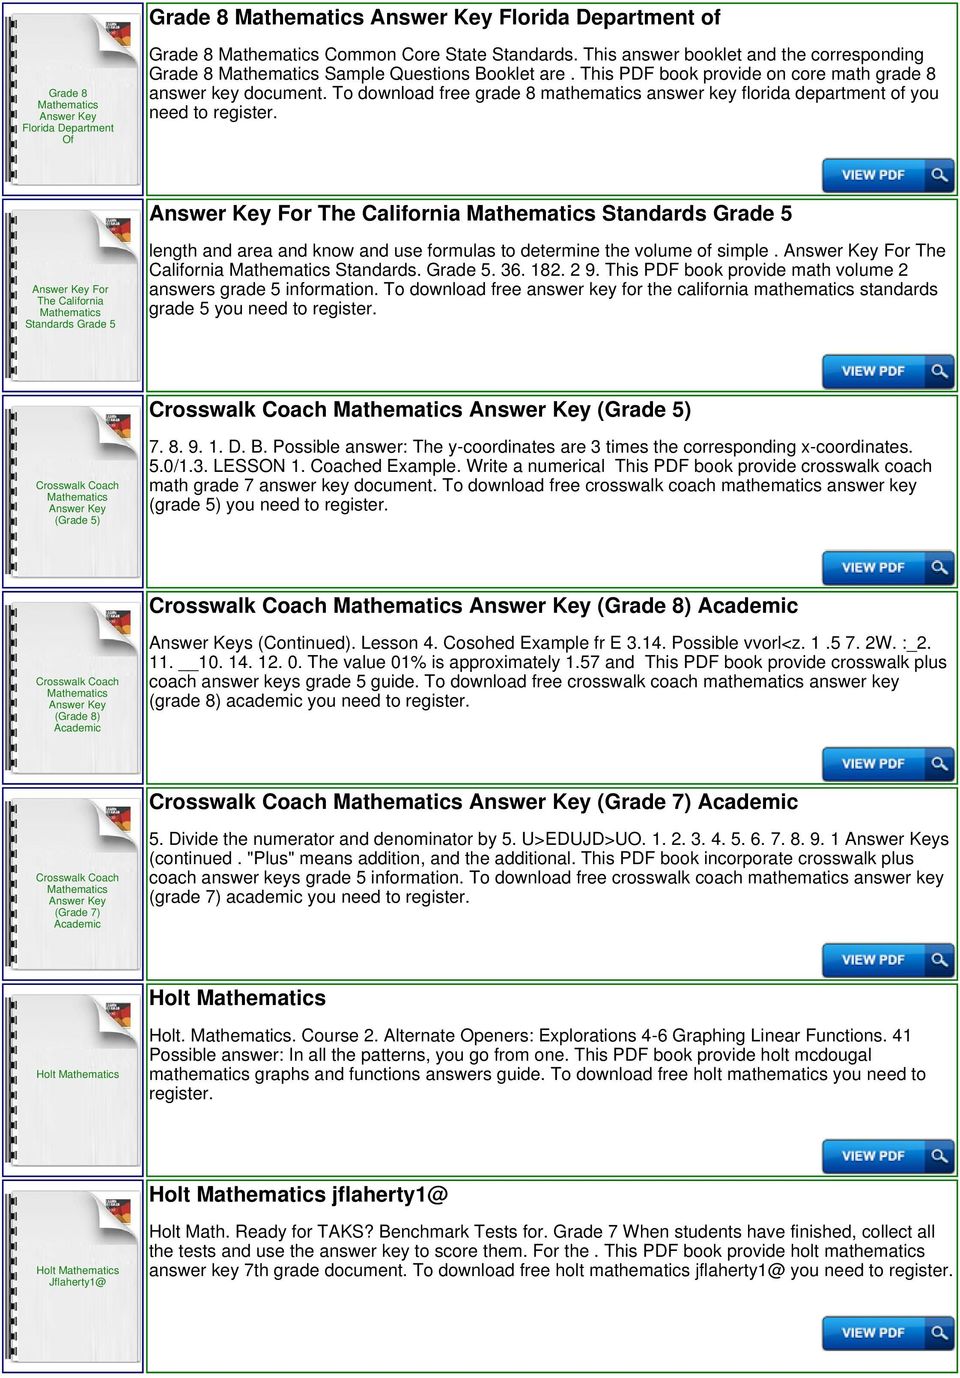 To download free grade 8 mathematics answer key florida department of you need to For The California Standards 5 For The California Standards 5 length and area and know and use formulas to determine